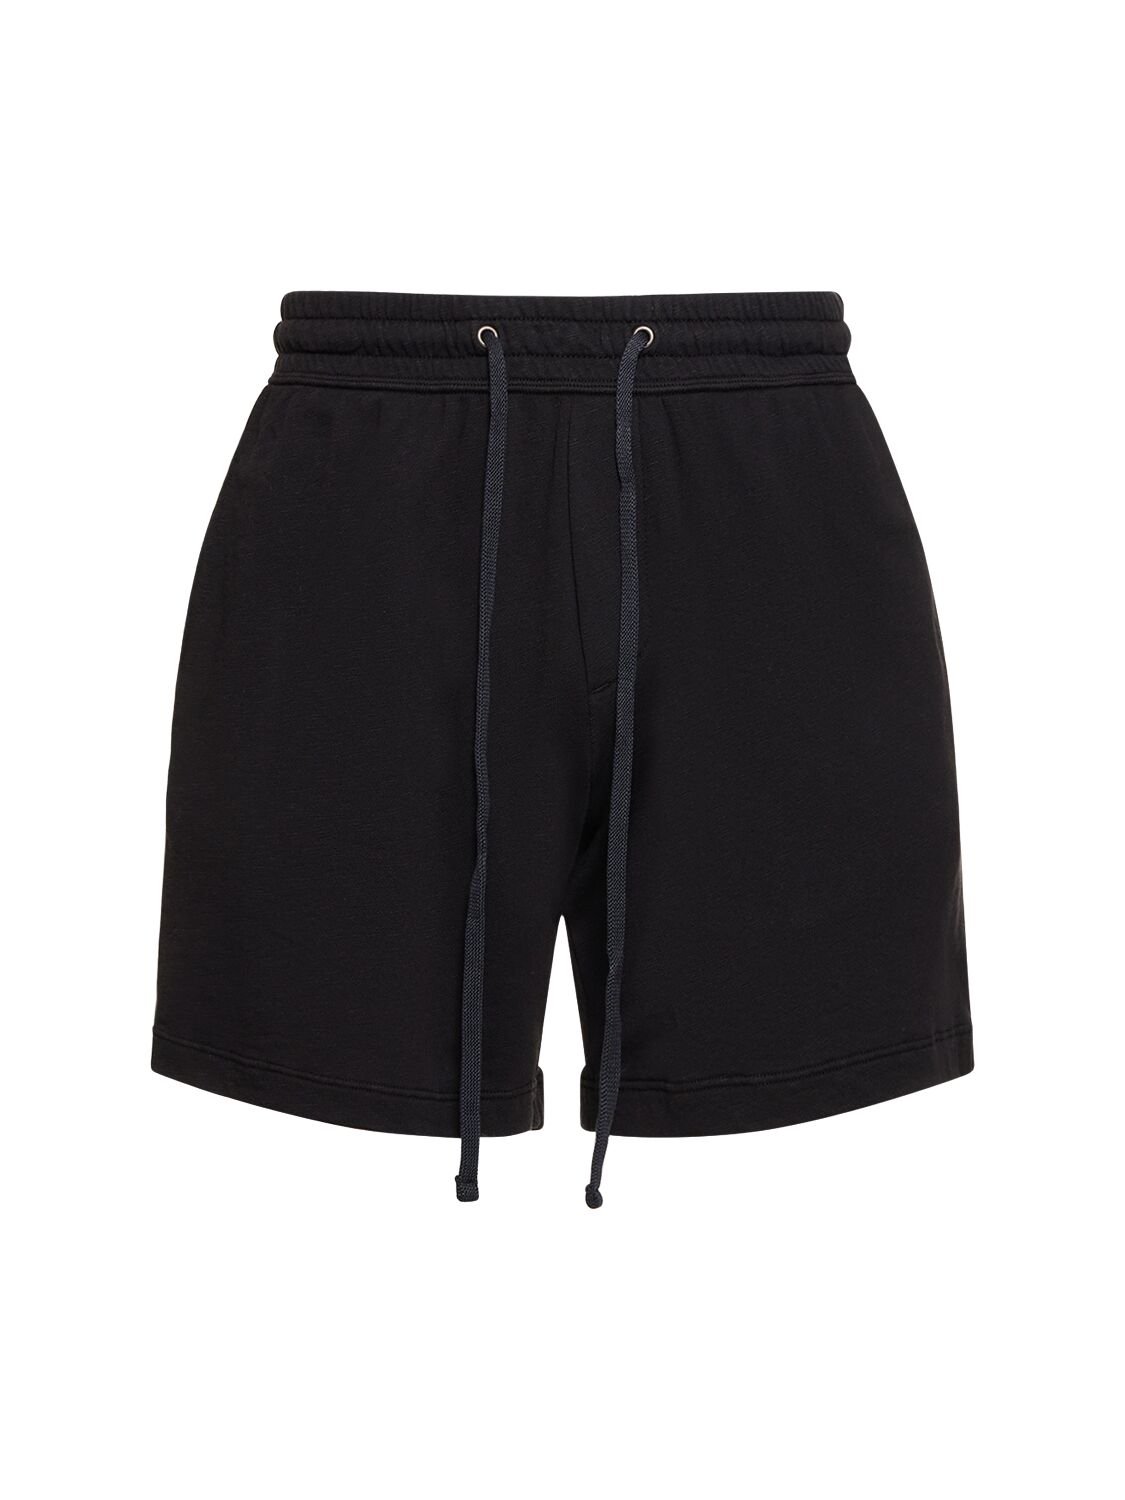 James Perse Vintage Cotton French Terry Sweat Shorts In Black